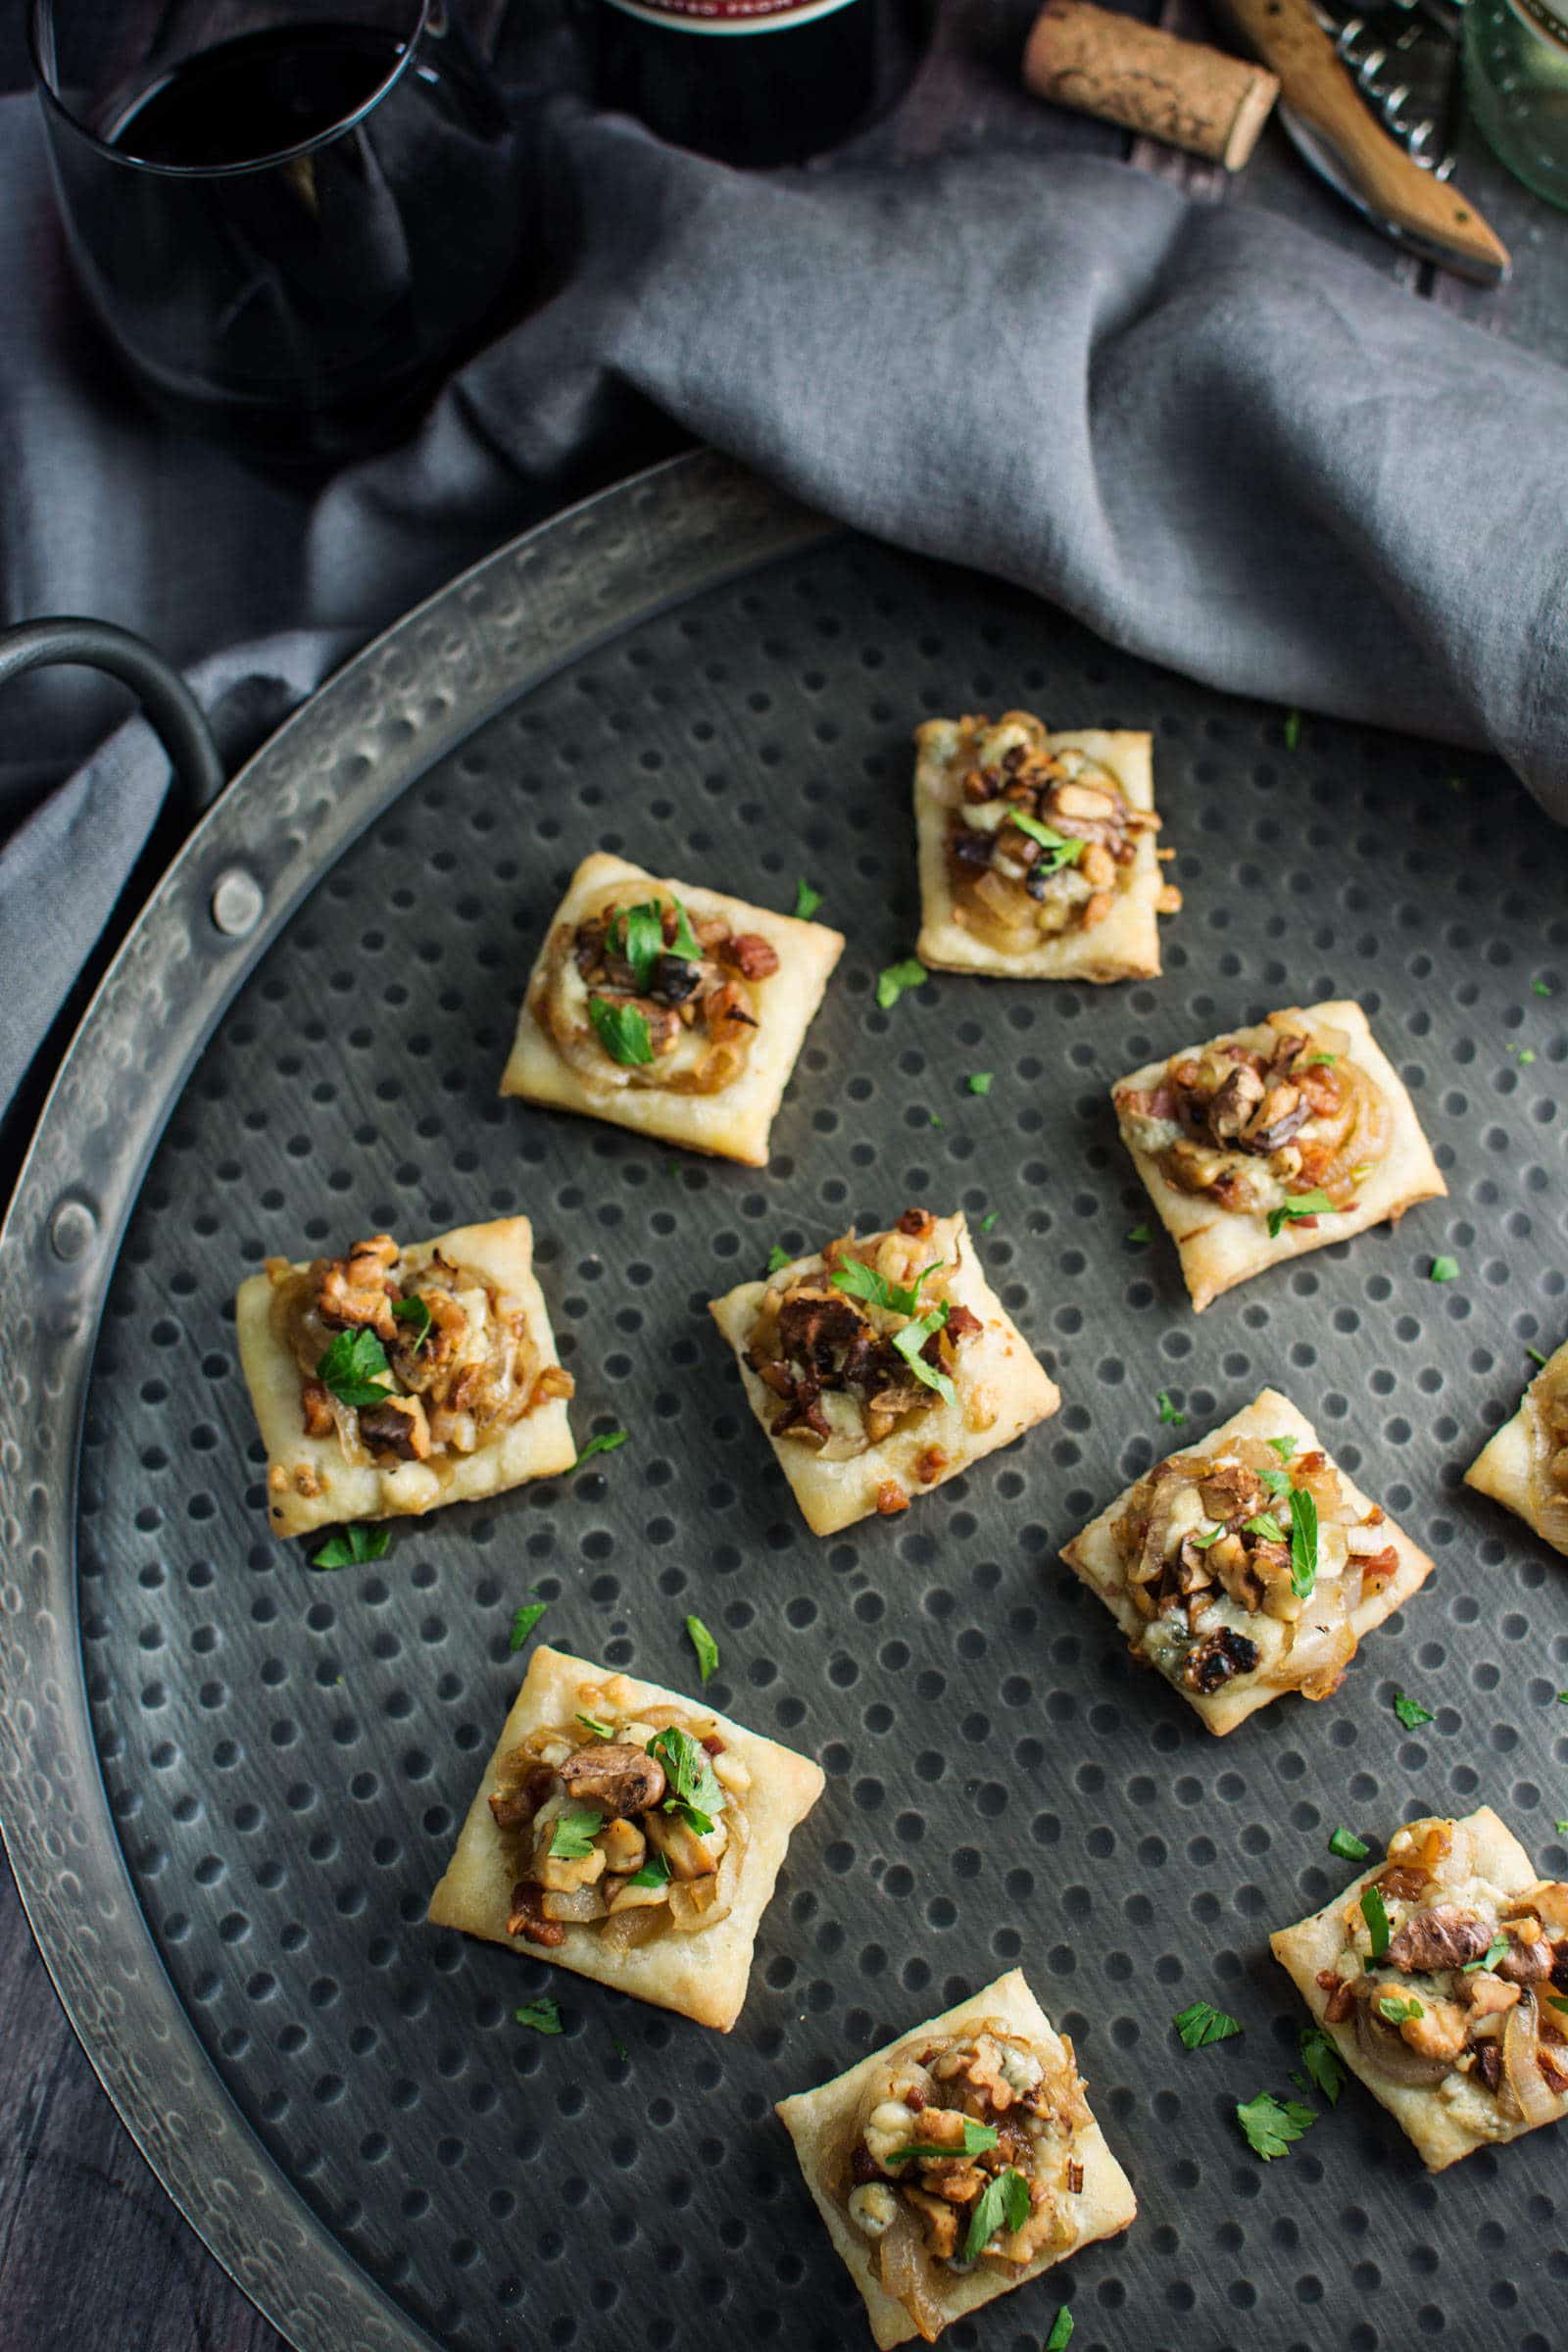 These tasty appetizers, Caramelized Shallot Tarts, are so easy to make and great to share with friends, family and @CavitWines! #Cavitwines #LivetheCavitLife #ad